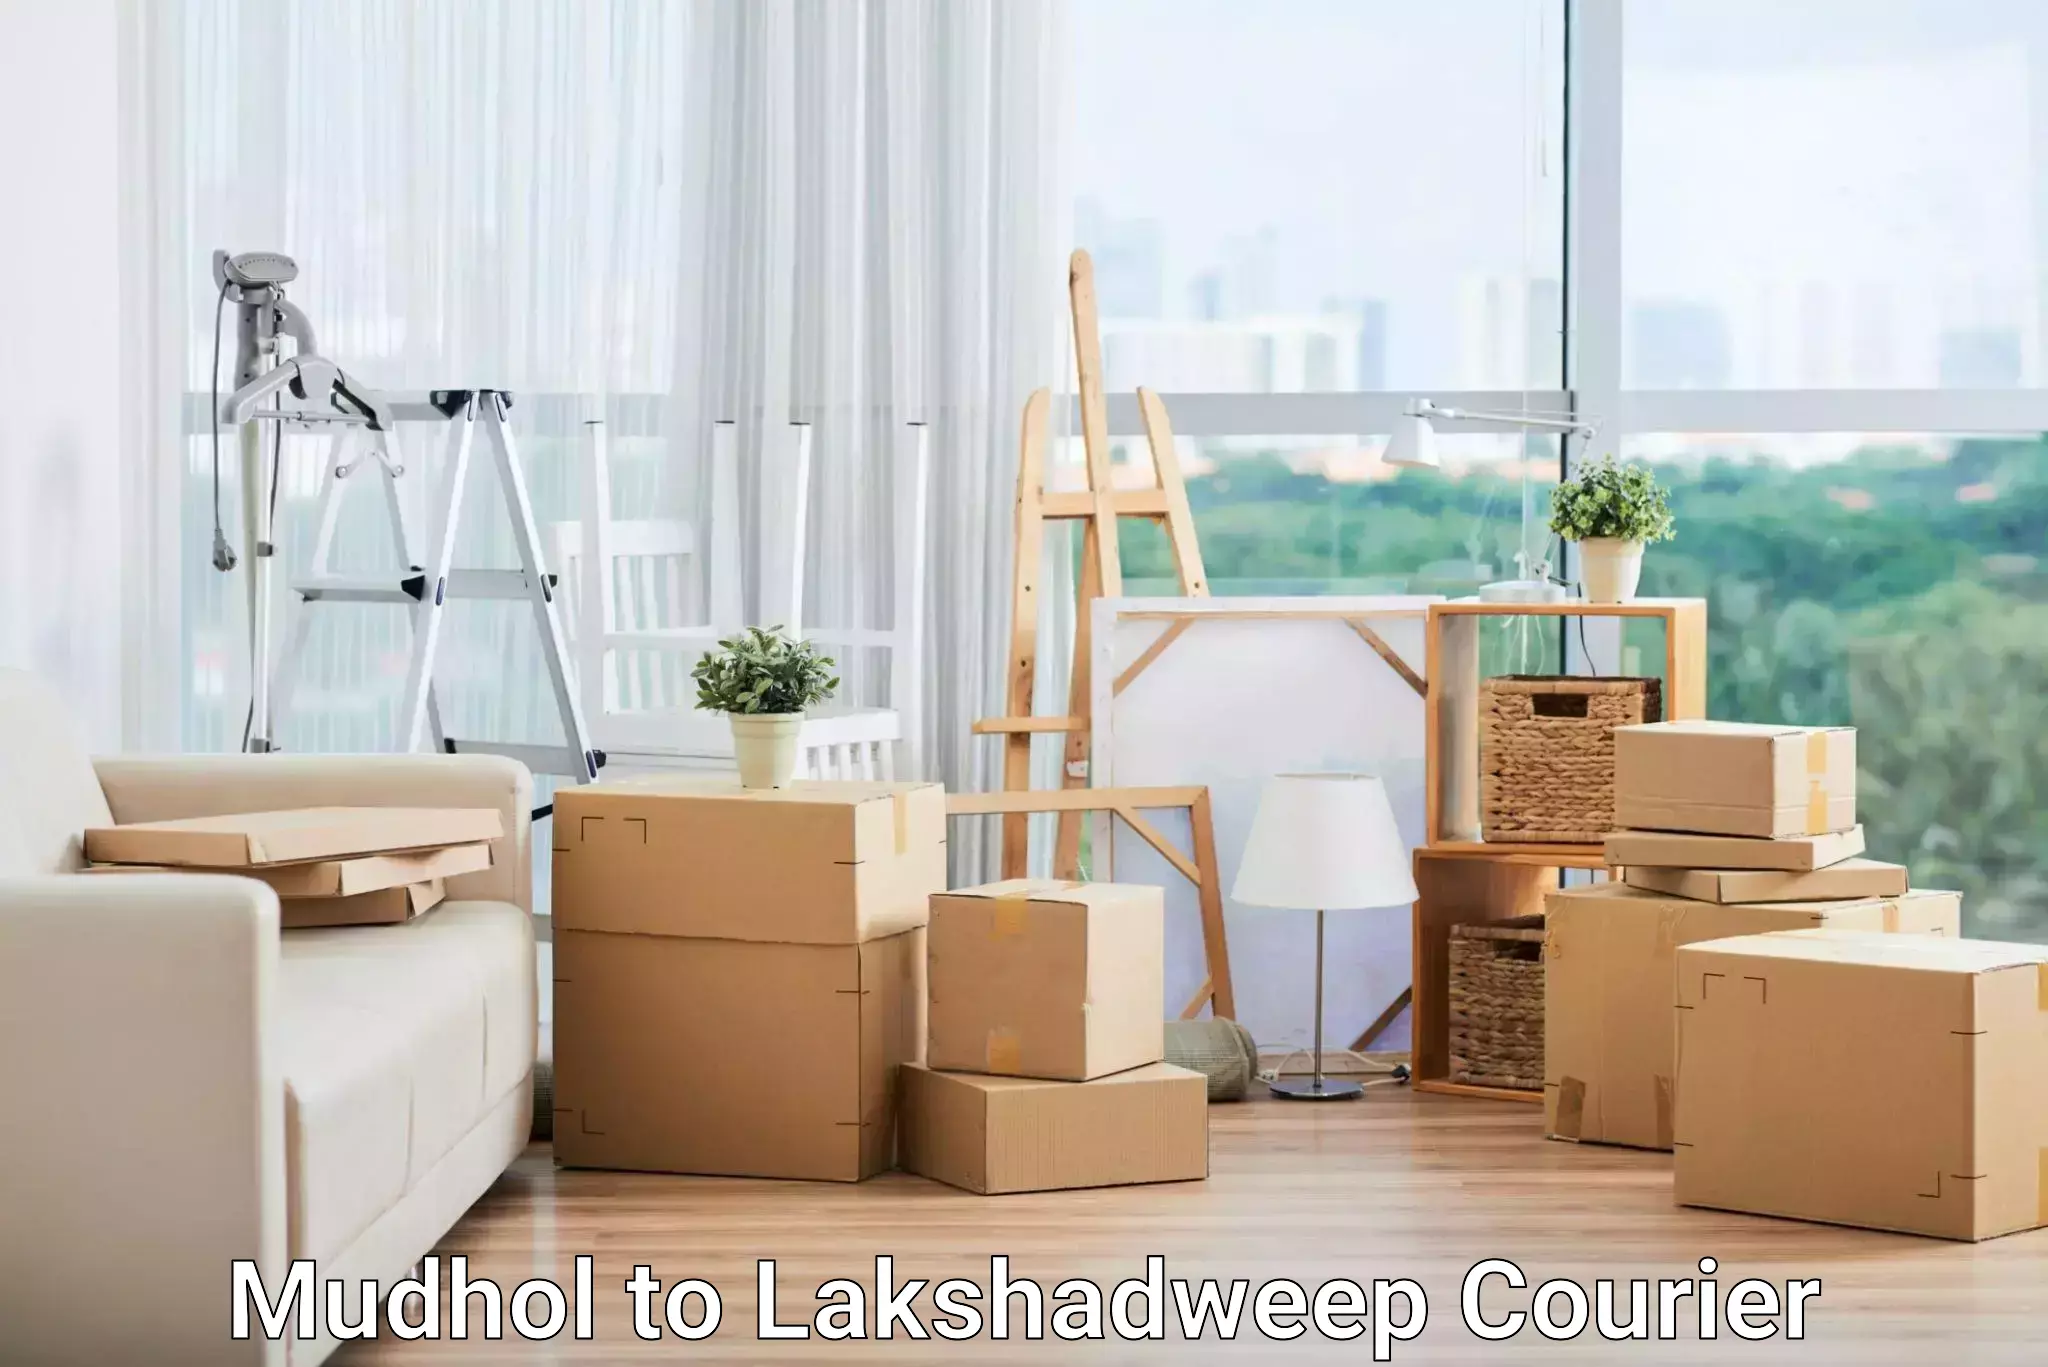 Multi-service courier options Mudhol to Lakshadweep